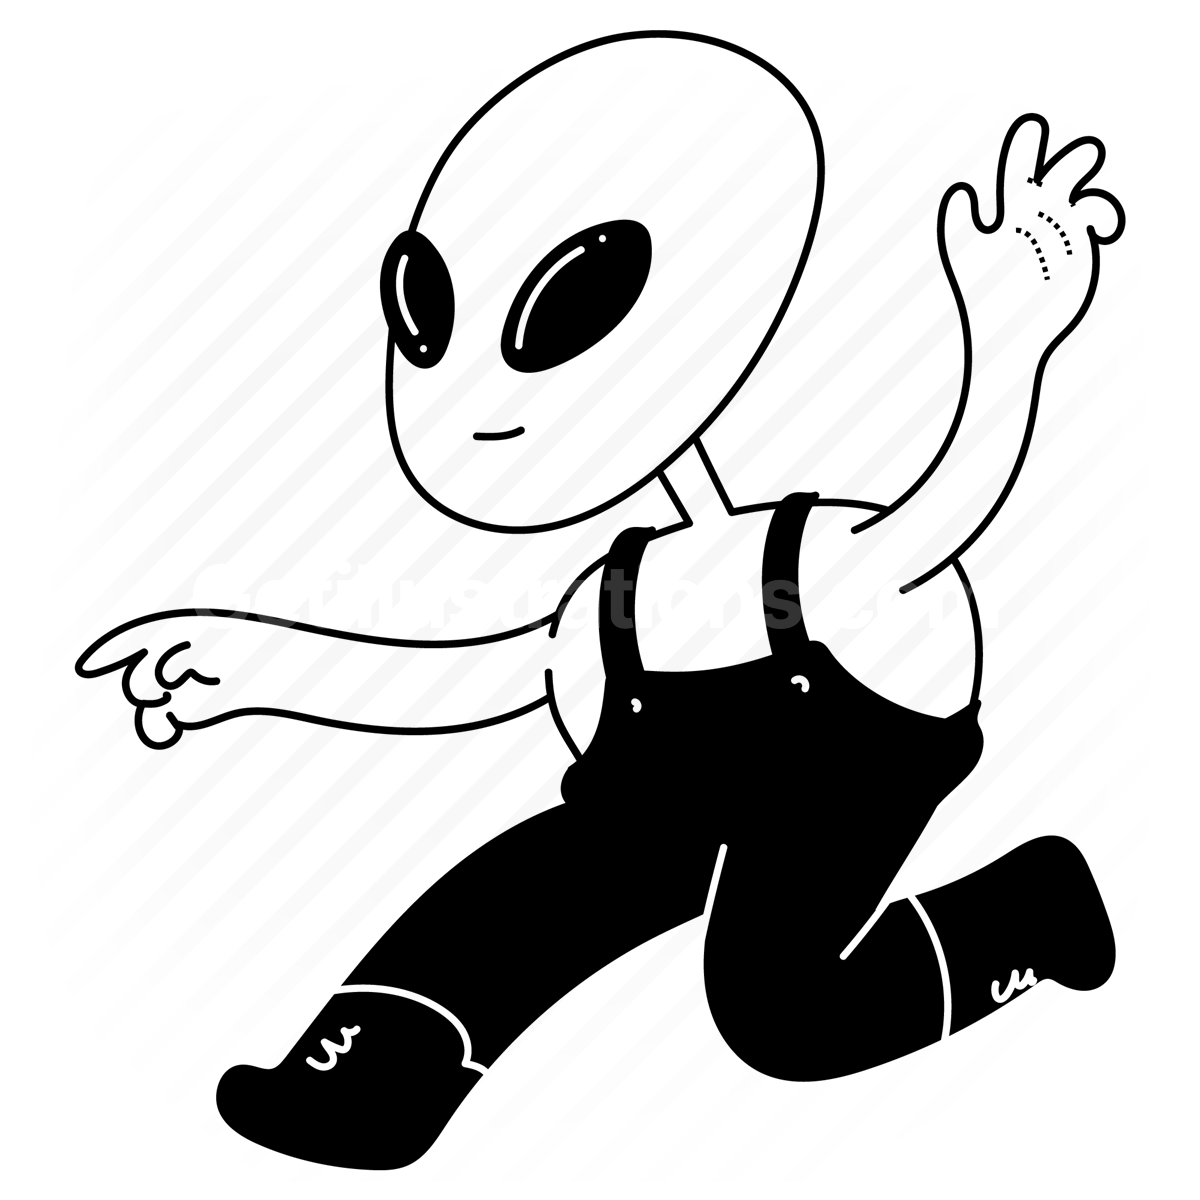 alien, monster, overalls, run, running, movement, outerspace, costume